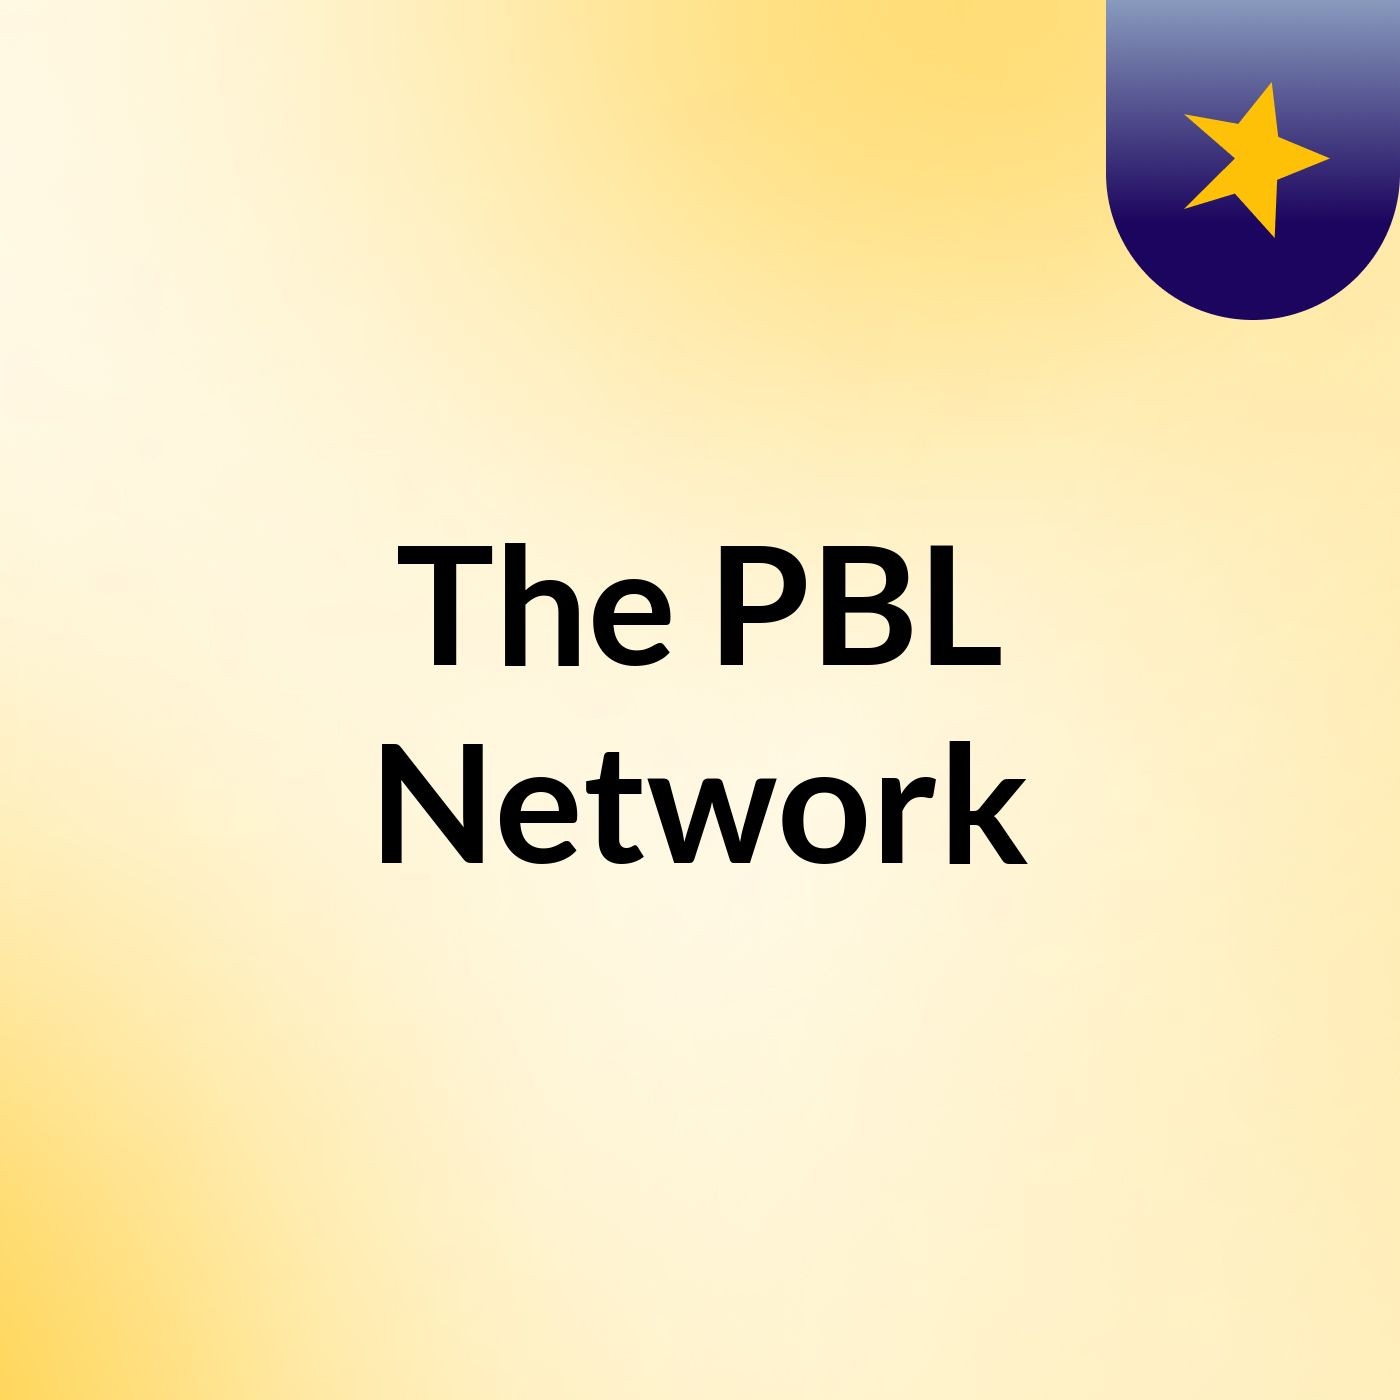 The PBL Network